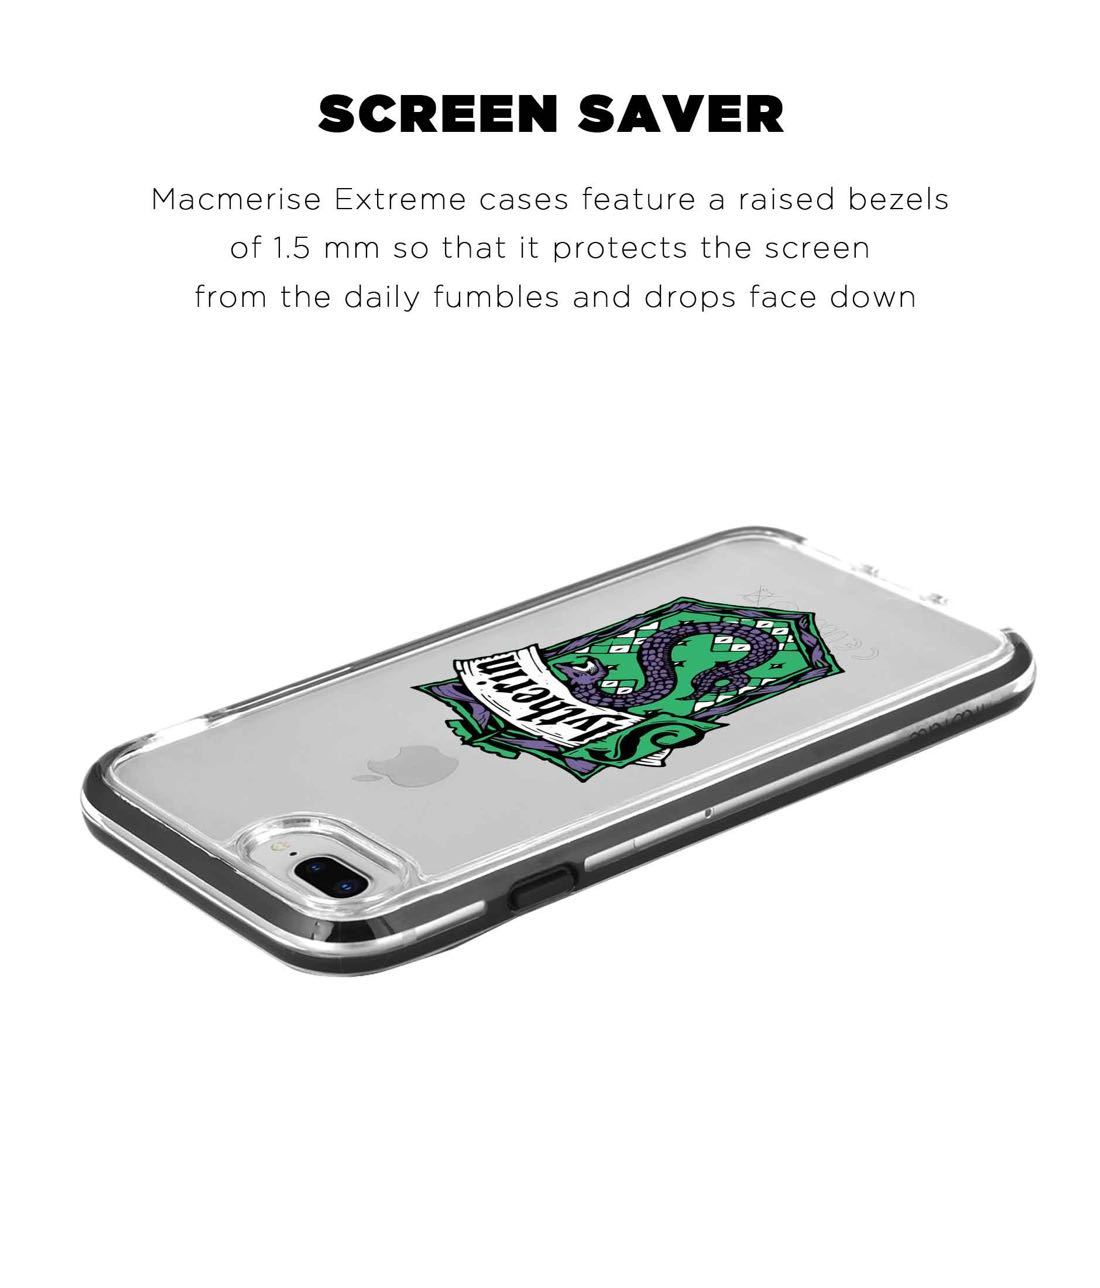 Crest Slytherin - Extreme Phone Case for iPhone 8 Plus